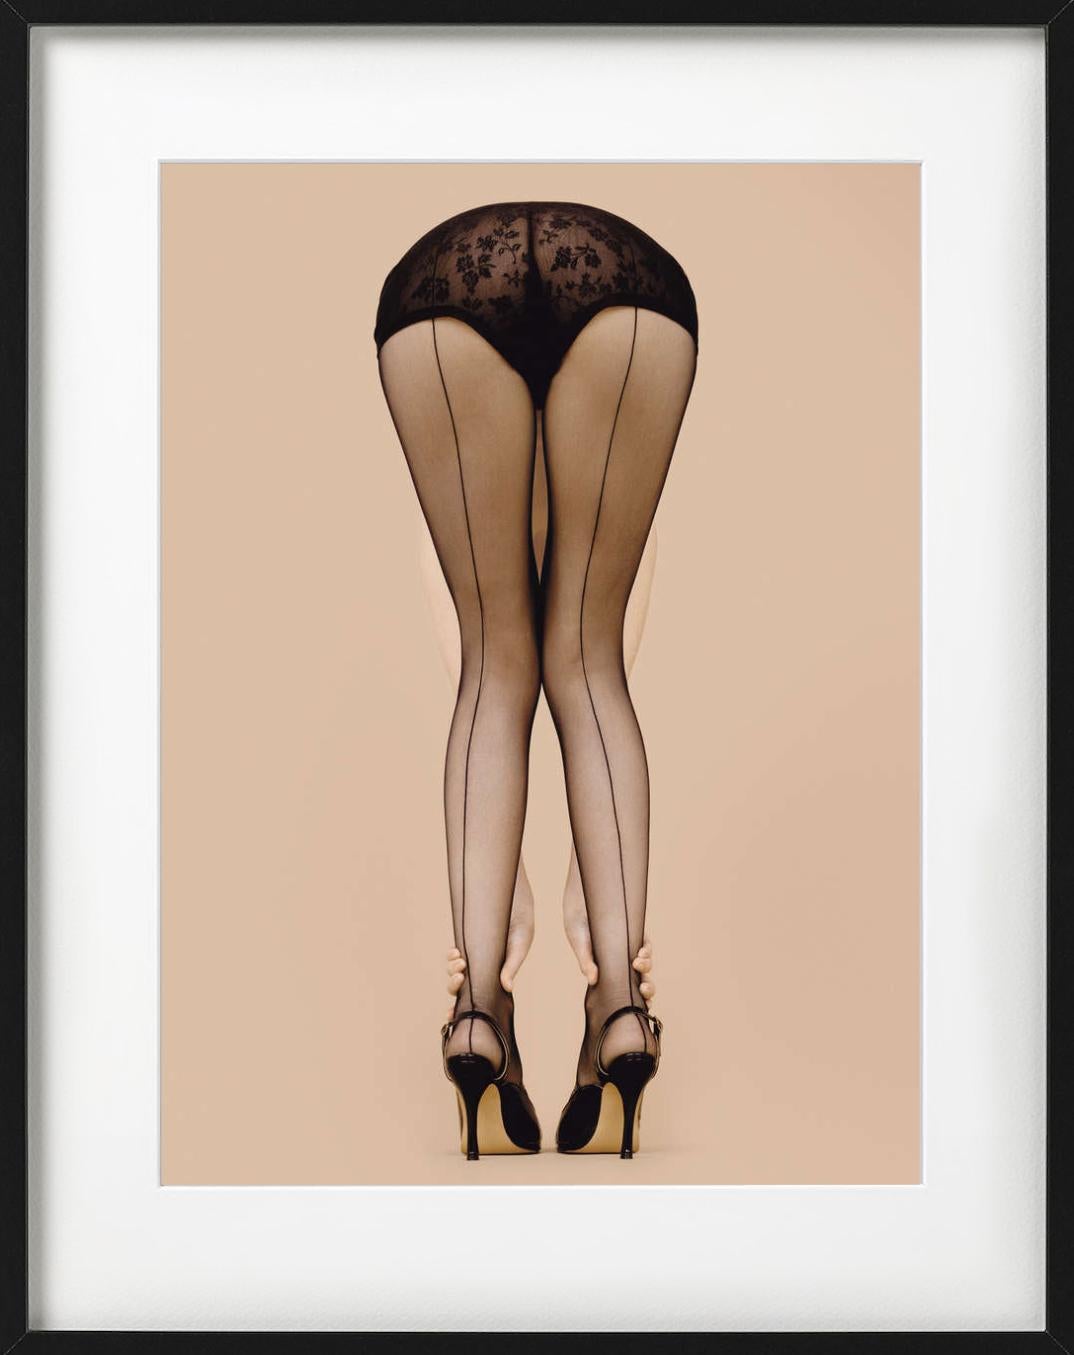 All prints are limited edition. Available in multiple sizes. High-end framing on request.


All prints are done and signed by the artist. The collector receives an additional certificate of authenticity from the gallery.


Rankin unites spontaneity